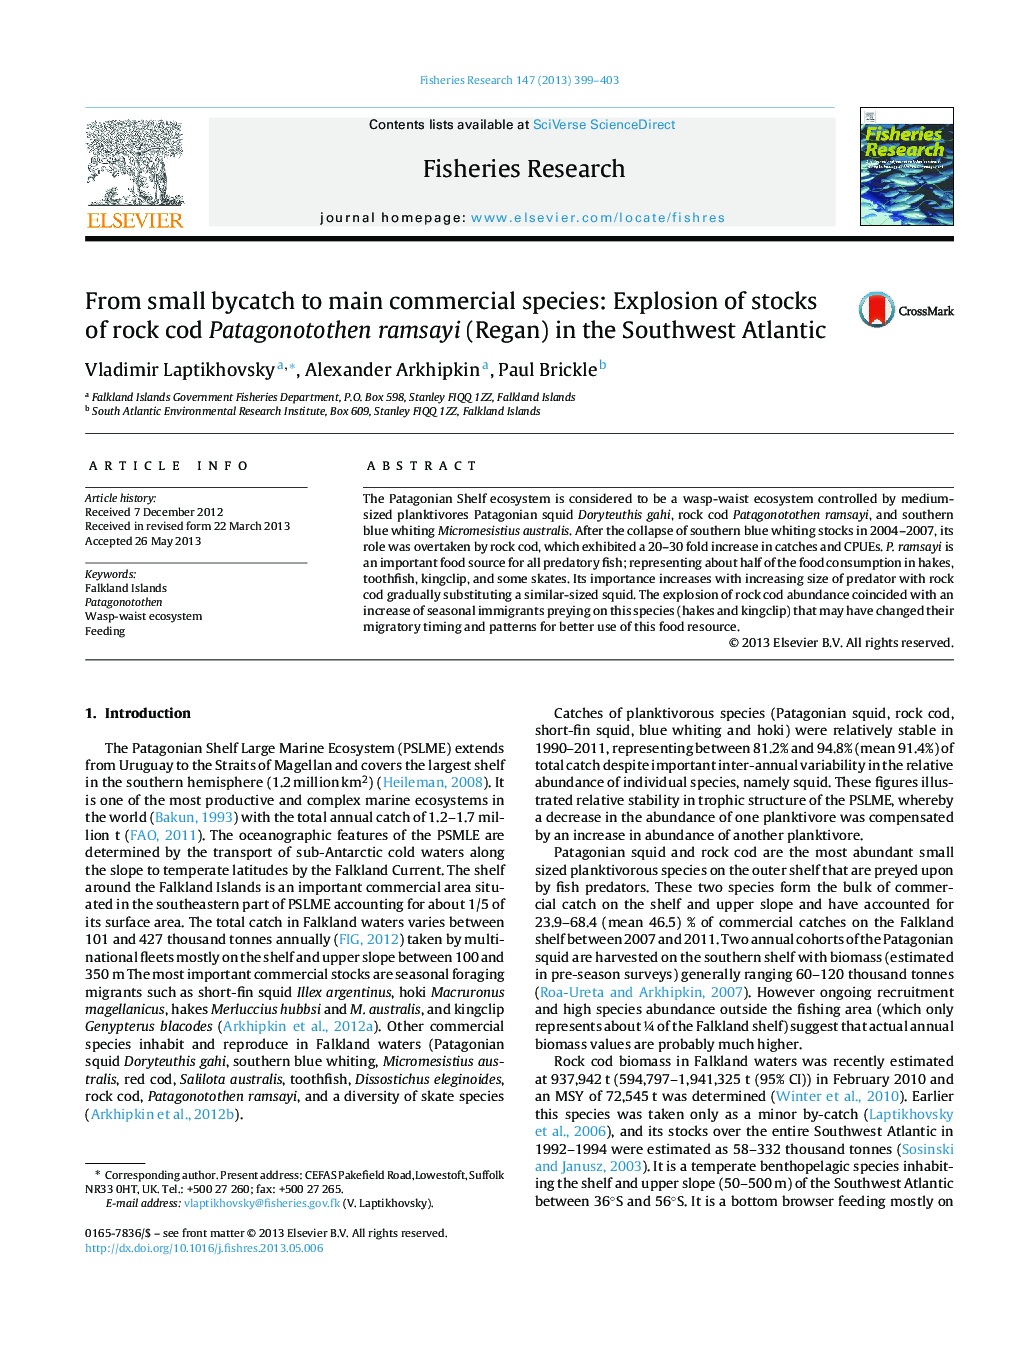 From small bycatch to main commercial species: Explosion of stocks of rock cod Patagonotothen ramsayi (Regan) in the Southwest Atlantic